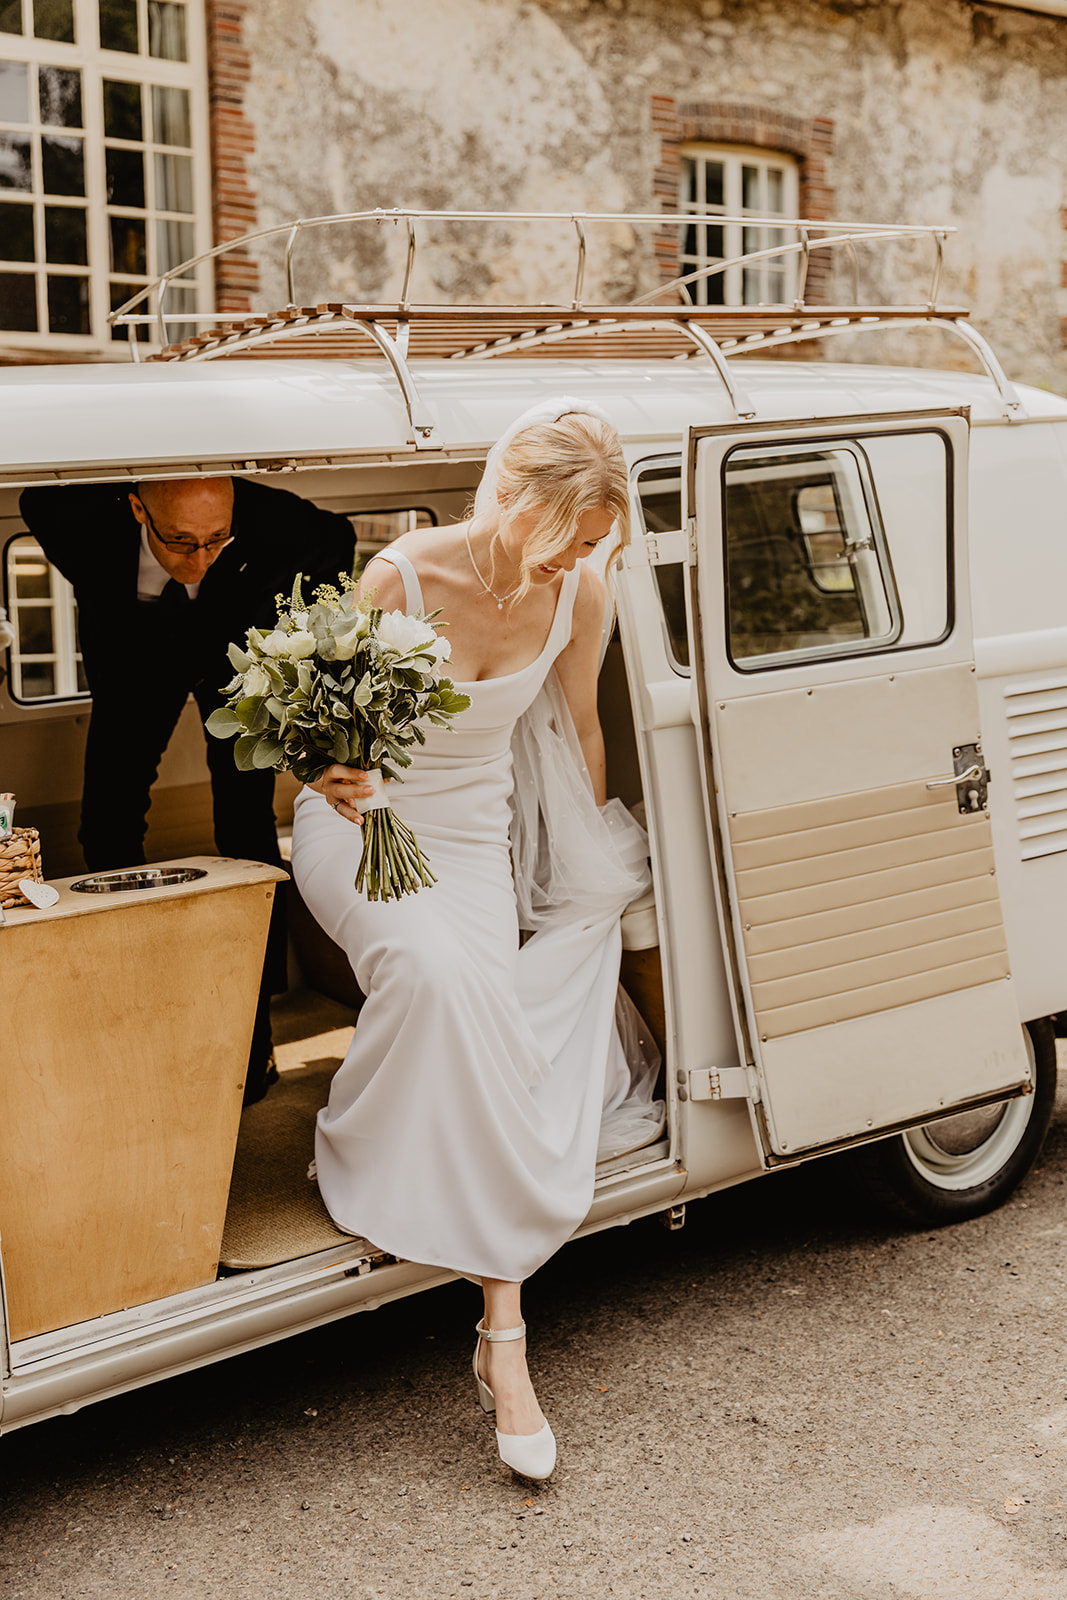 Bride arriving in her VW camper at a Bury Manor Barn Wedding in Sussex. Photographer OliveJoy Photography.